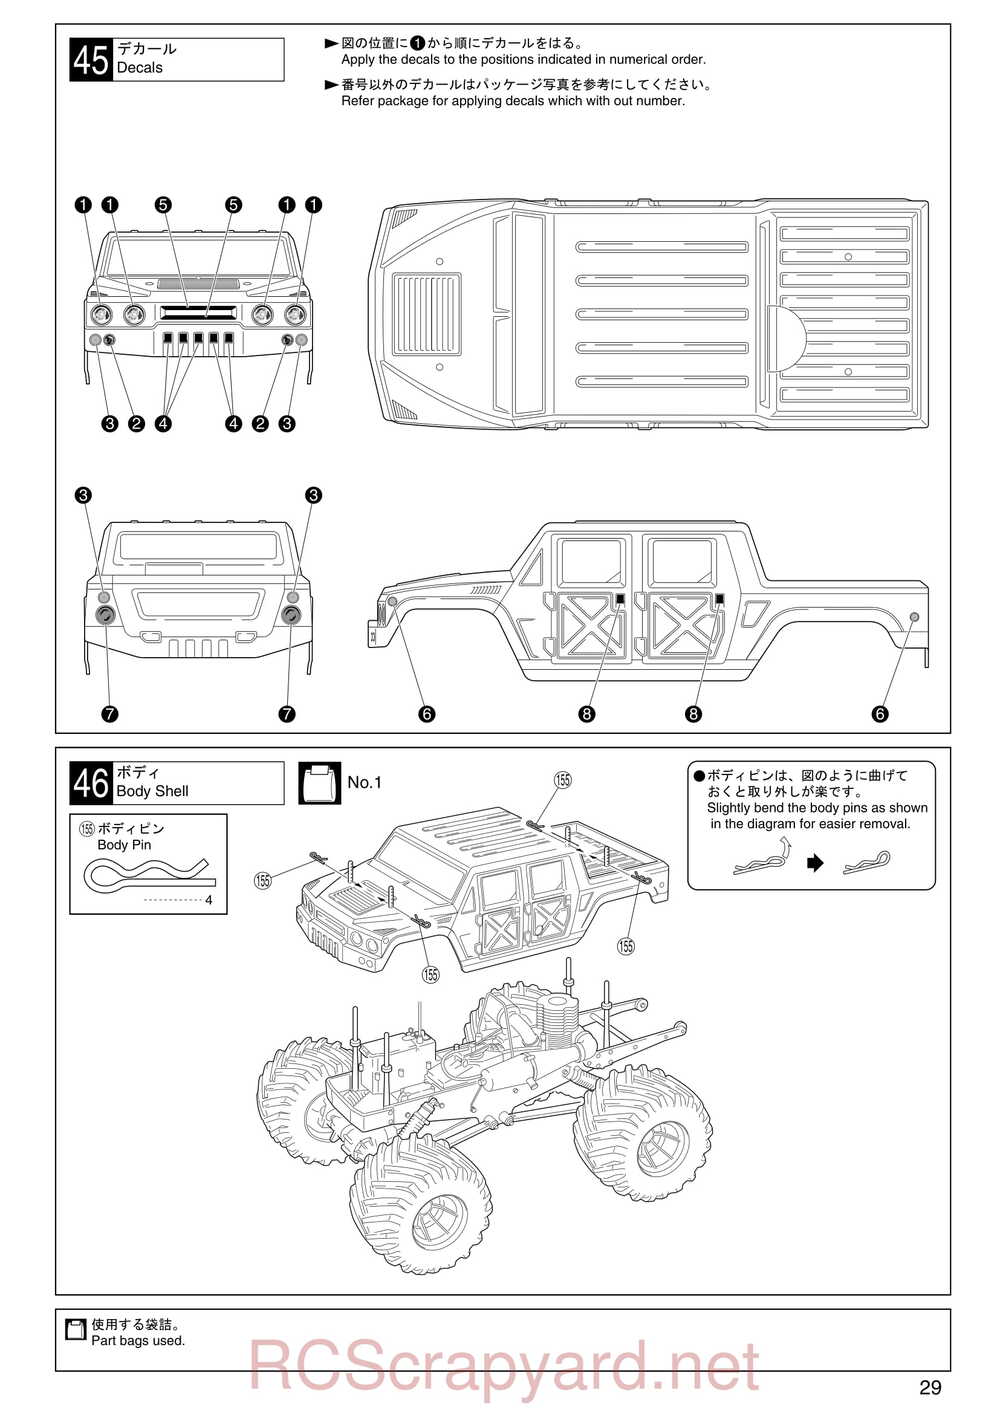 Kyosho - 31224 - Mad-Armour - Manual - Page 29